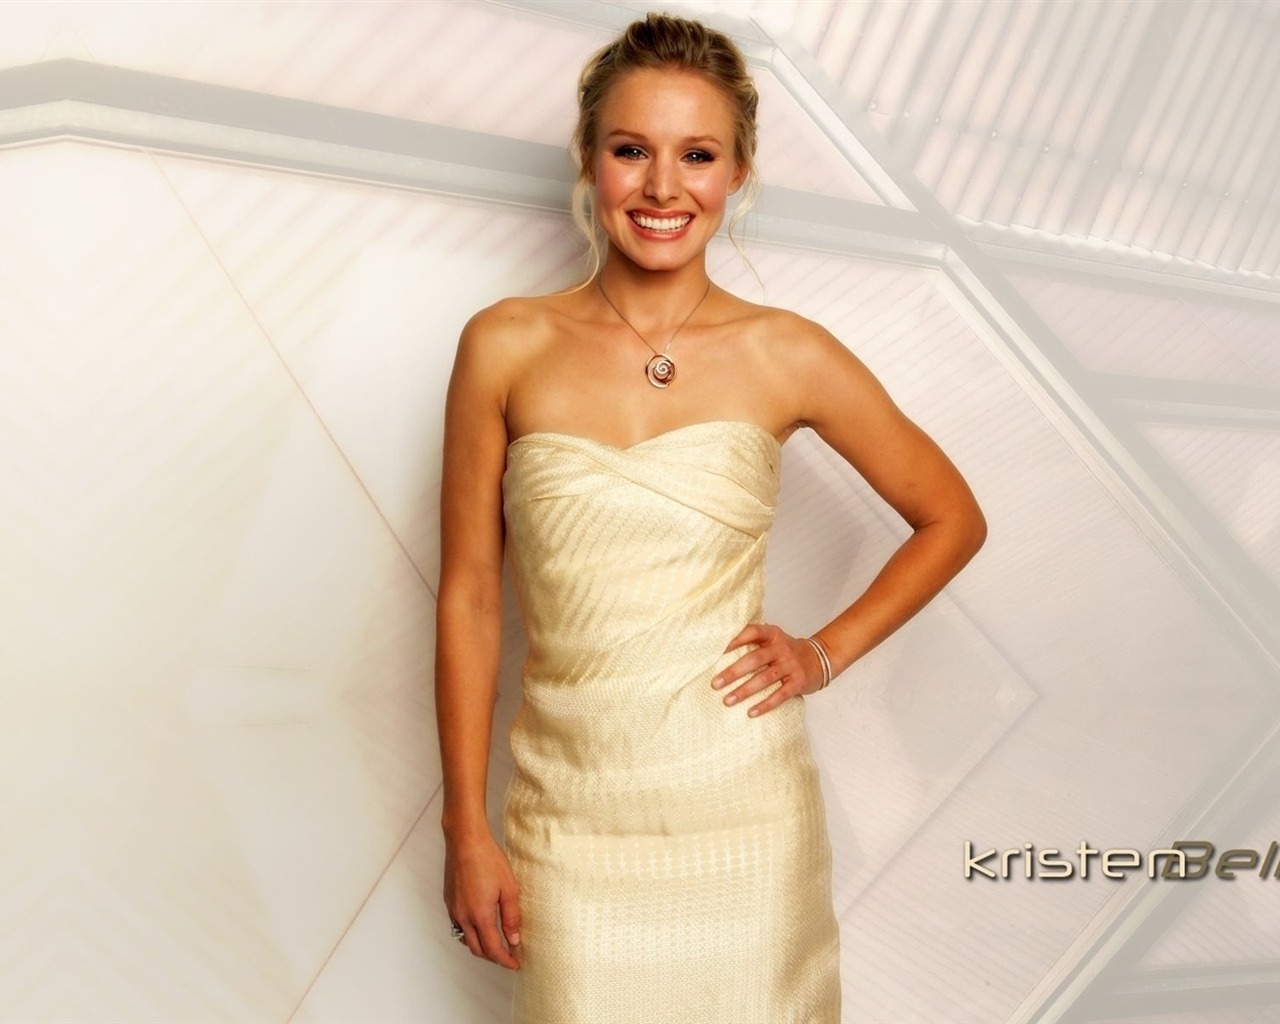 Kristen Bell #043 - 1280x1024 Wallpapers Pictures Photos Images